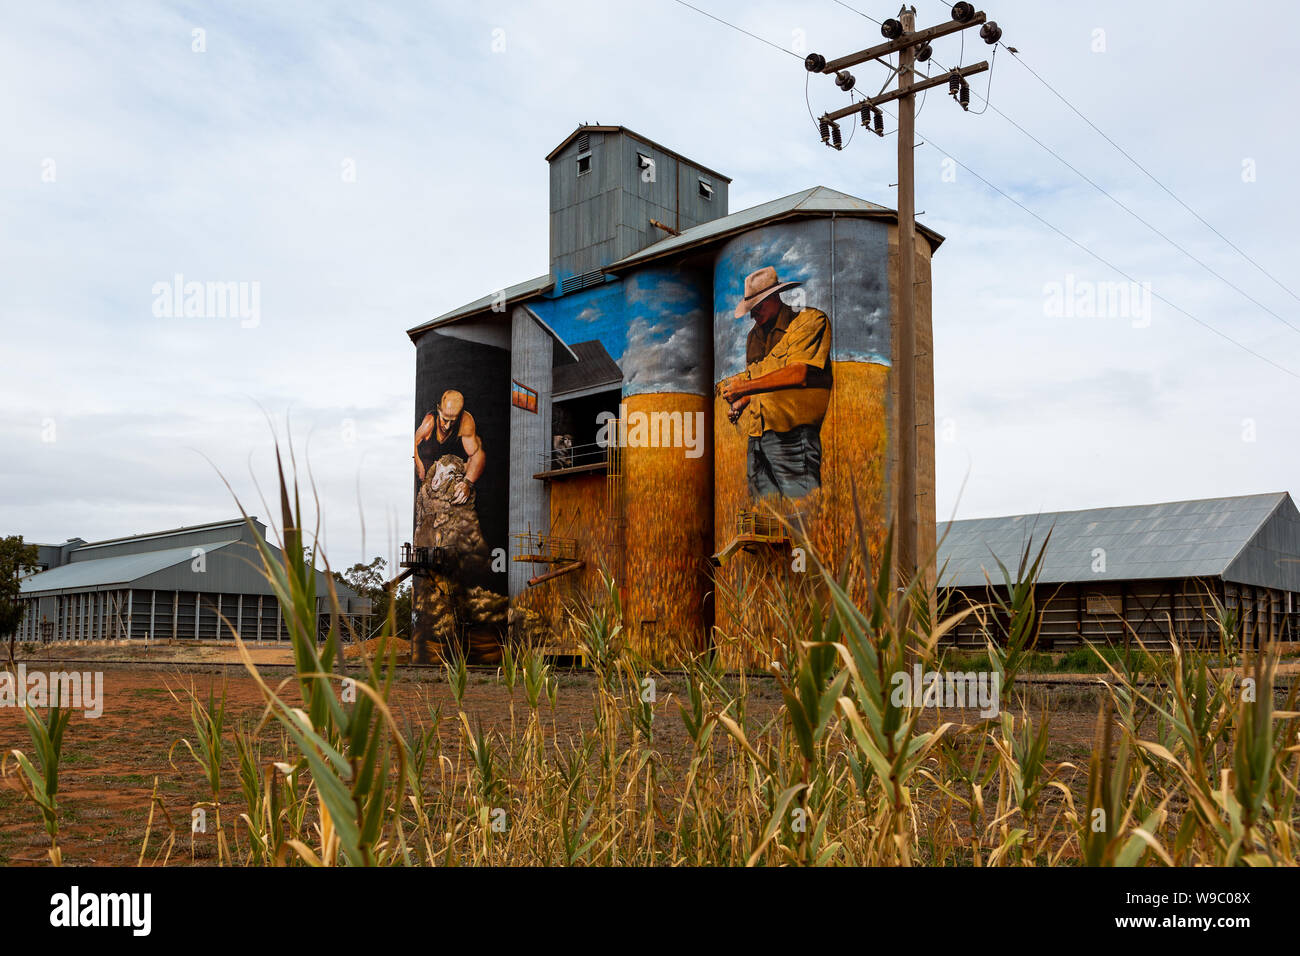 The Weethalle Silo Art project in the Bland Shire Council in NSW Australia taken on 29th July 2019 Stock Photo